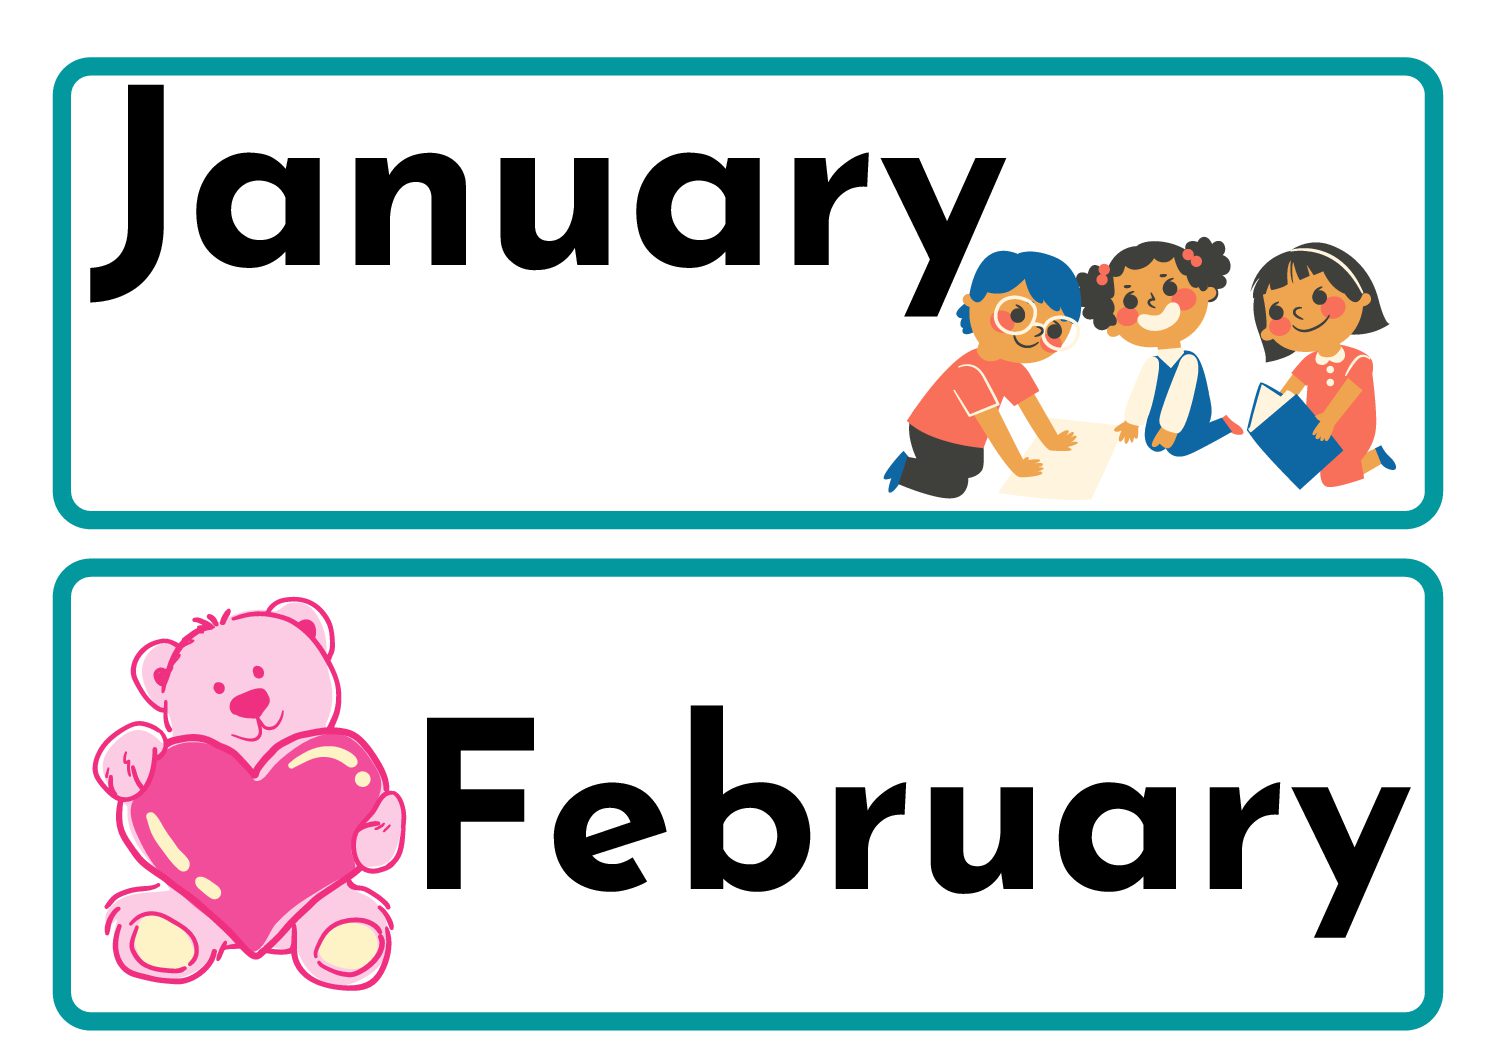 months of the year printables for kindergarten